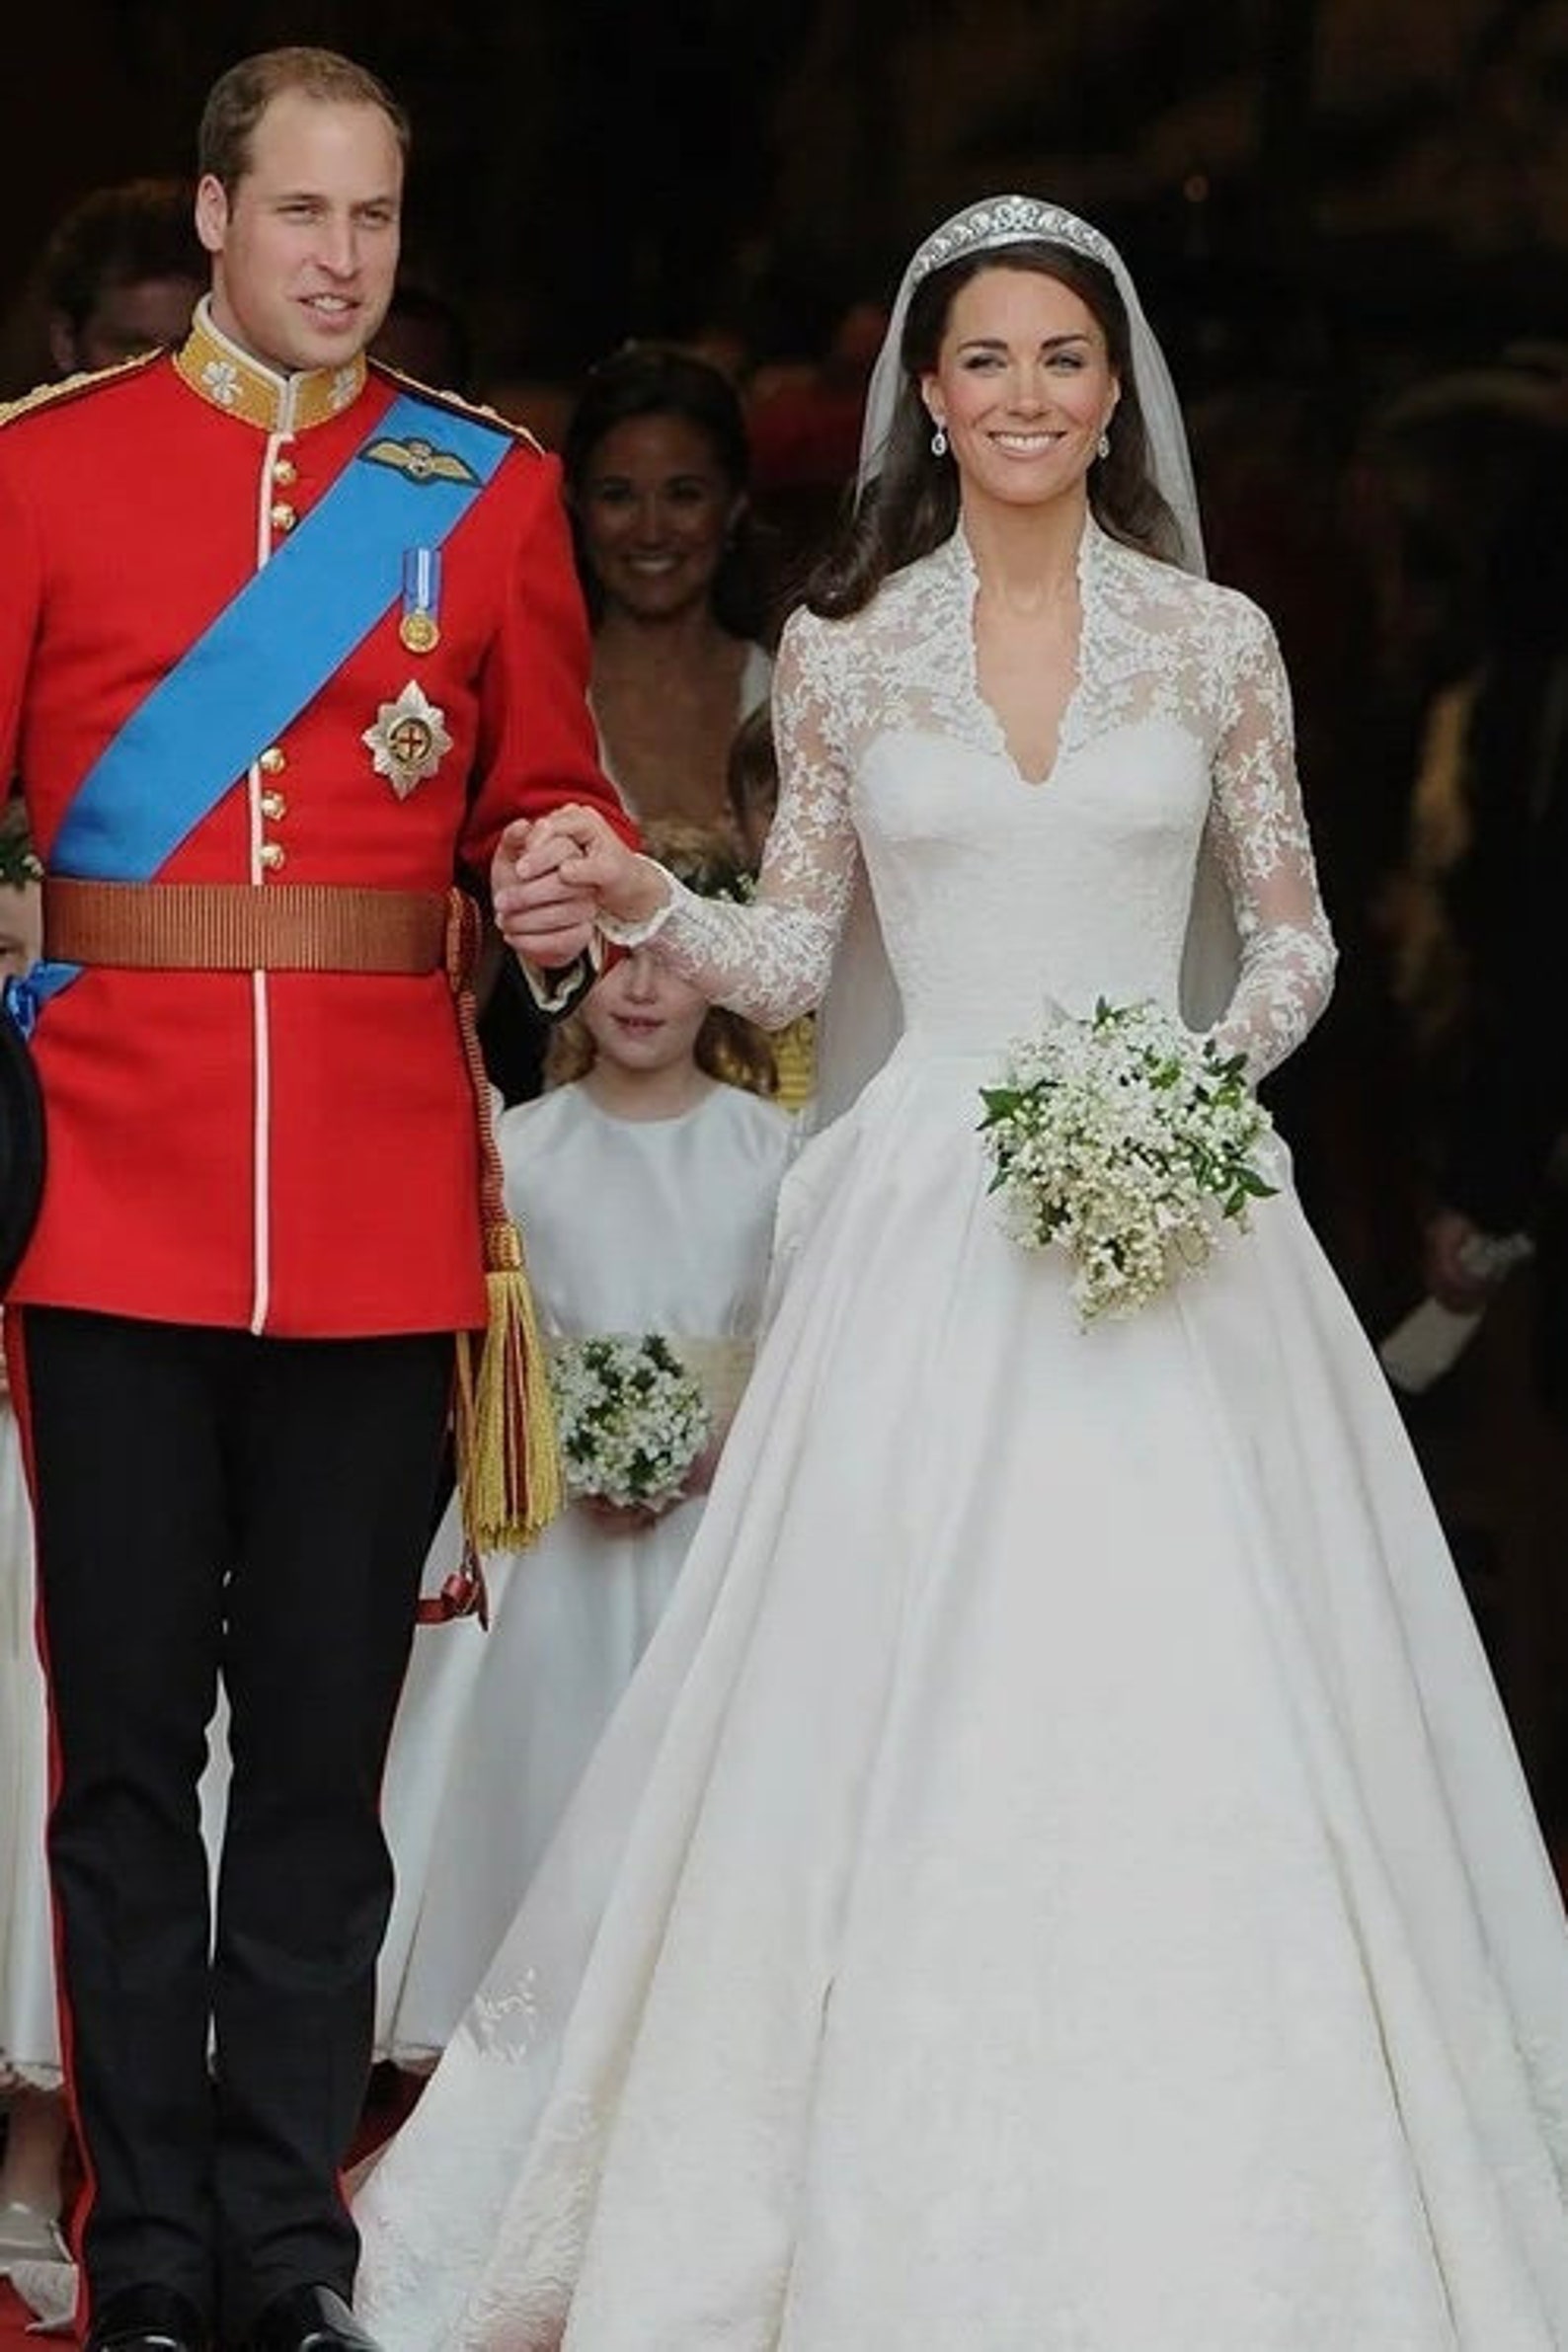 Kate Middleton Wedding Dress With Delicate Floral Lace Design - Etsy